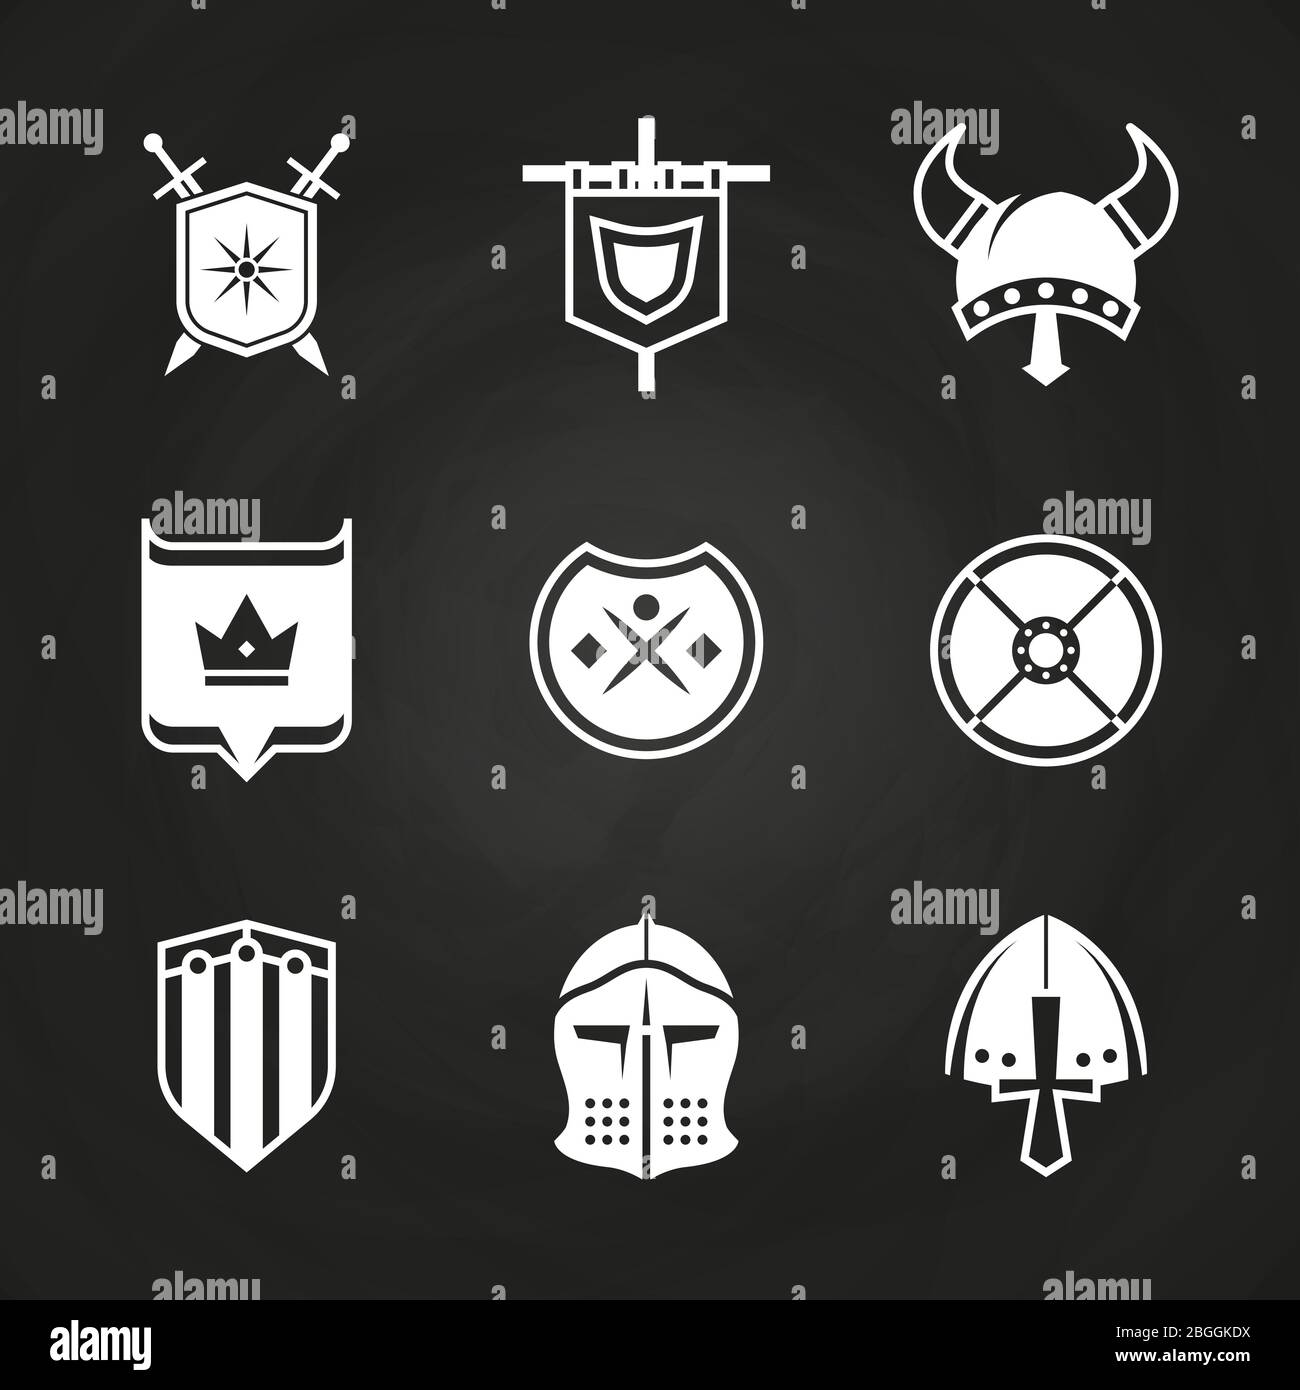 White silhouette viking knight helmets and shields icons isolated on black. Vector illustration Stock Vector